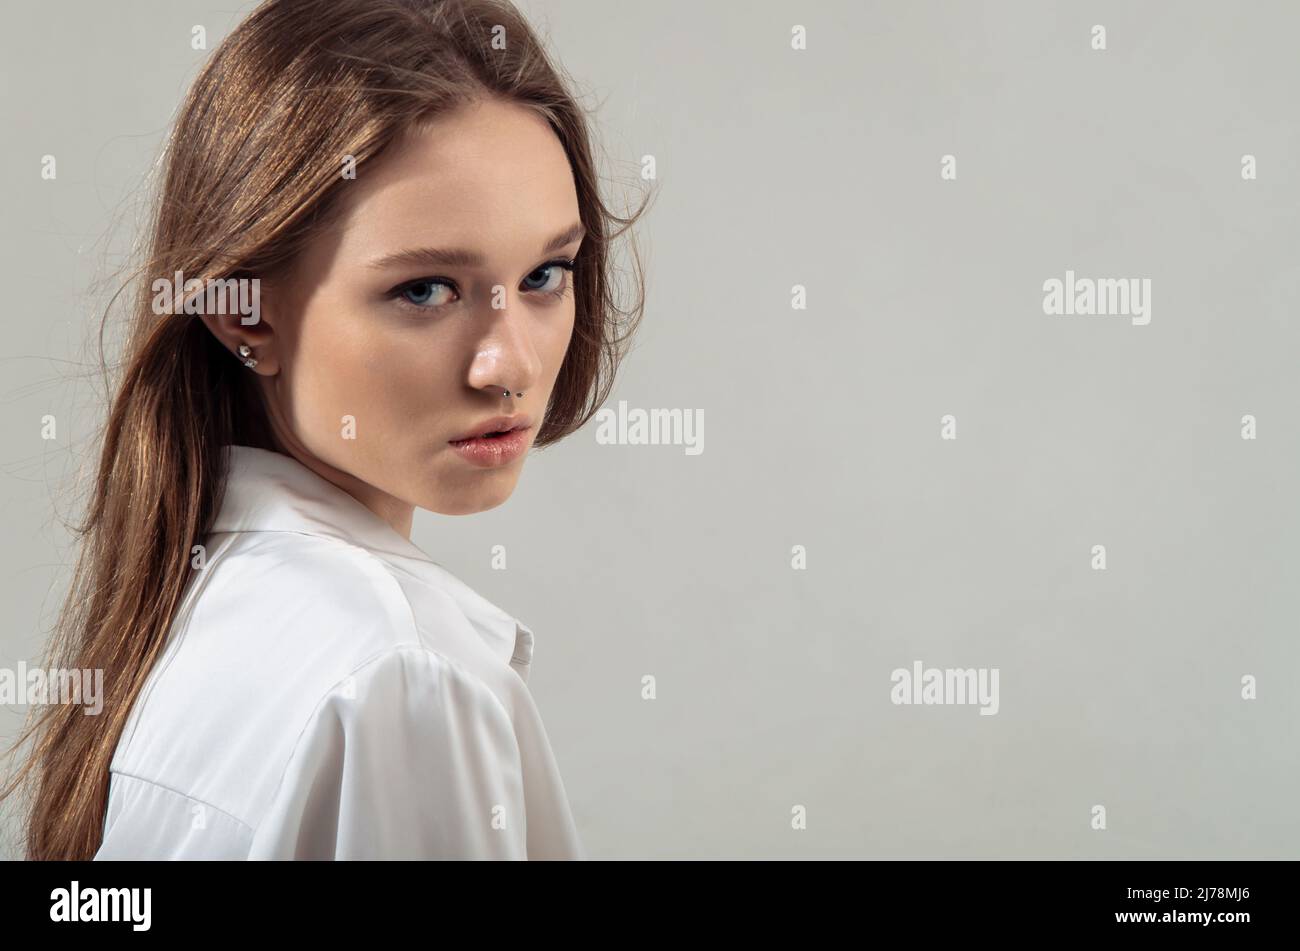 Portrait of sophisticated young woman advertising products and services. Stock Photo